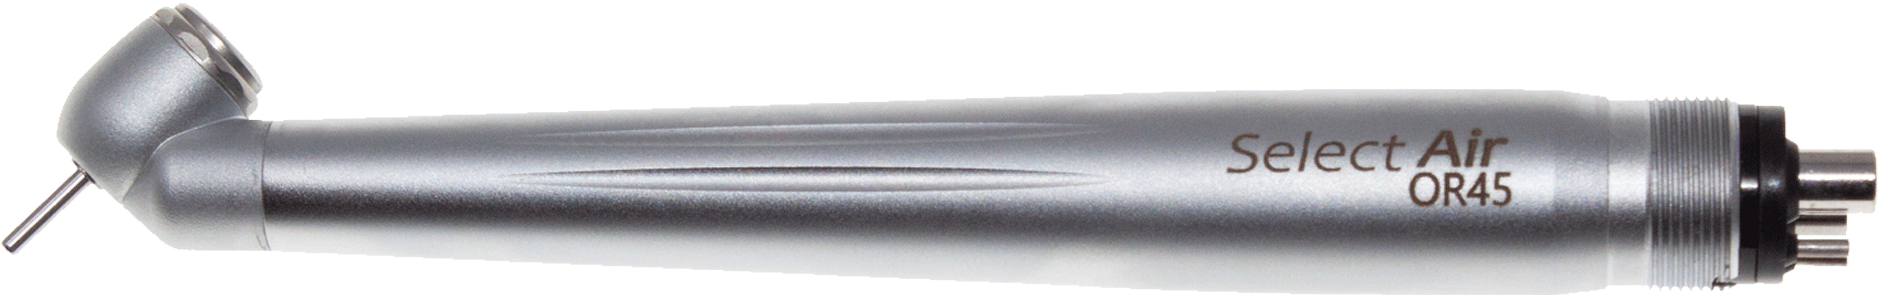 select air dental handpieces or